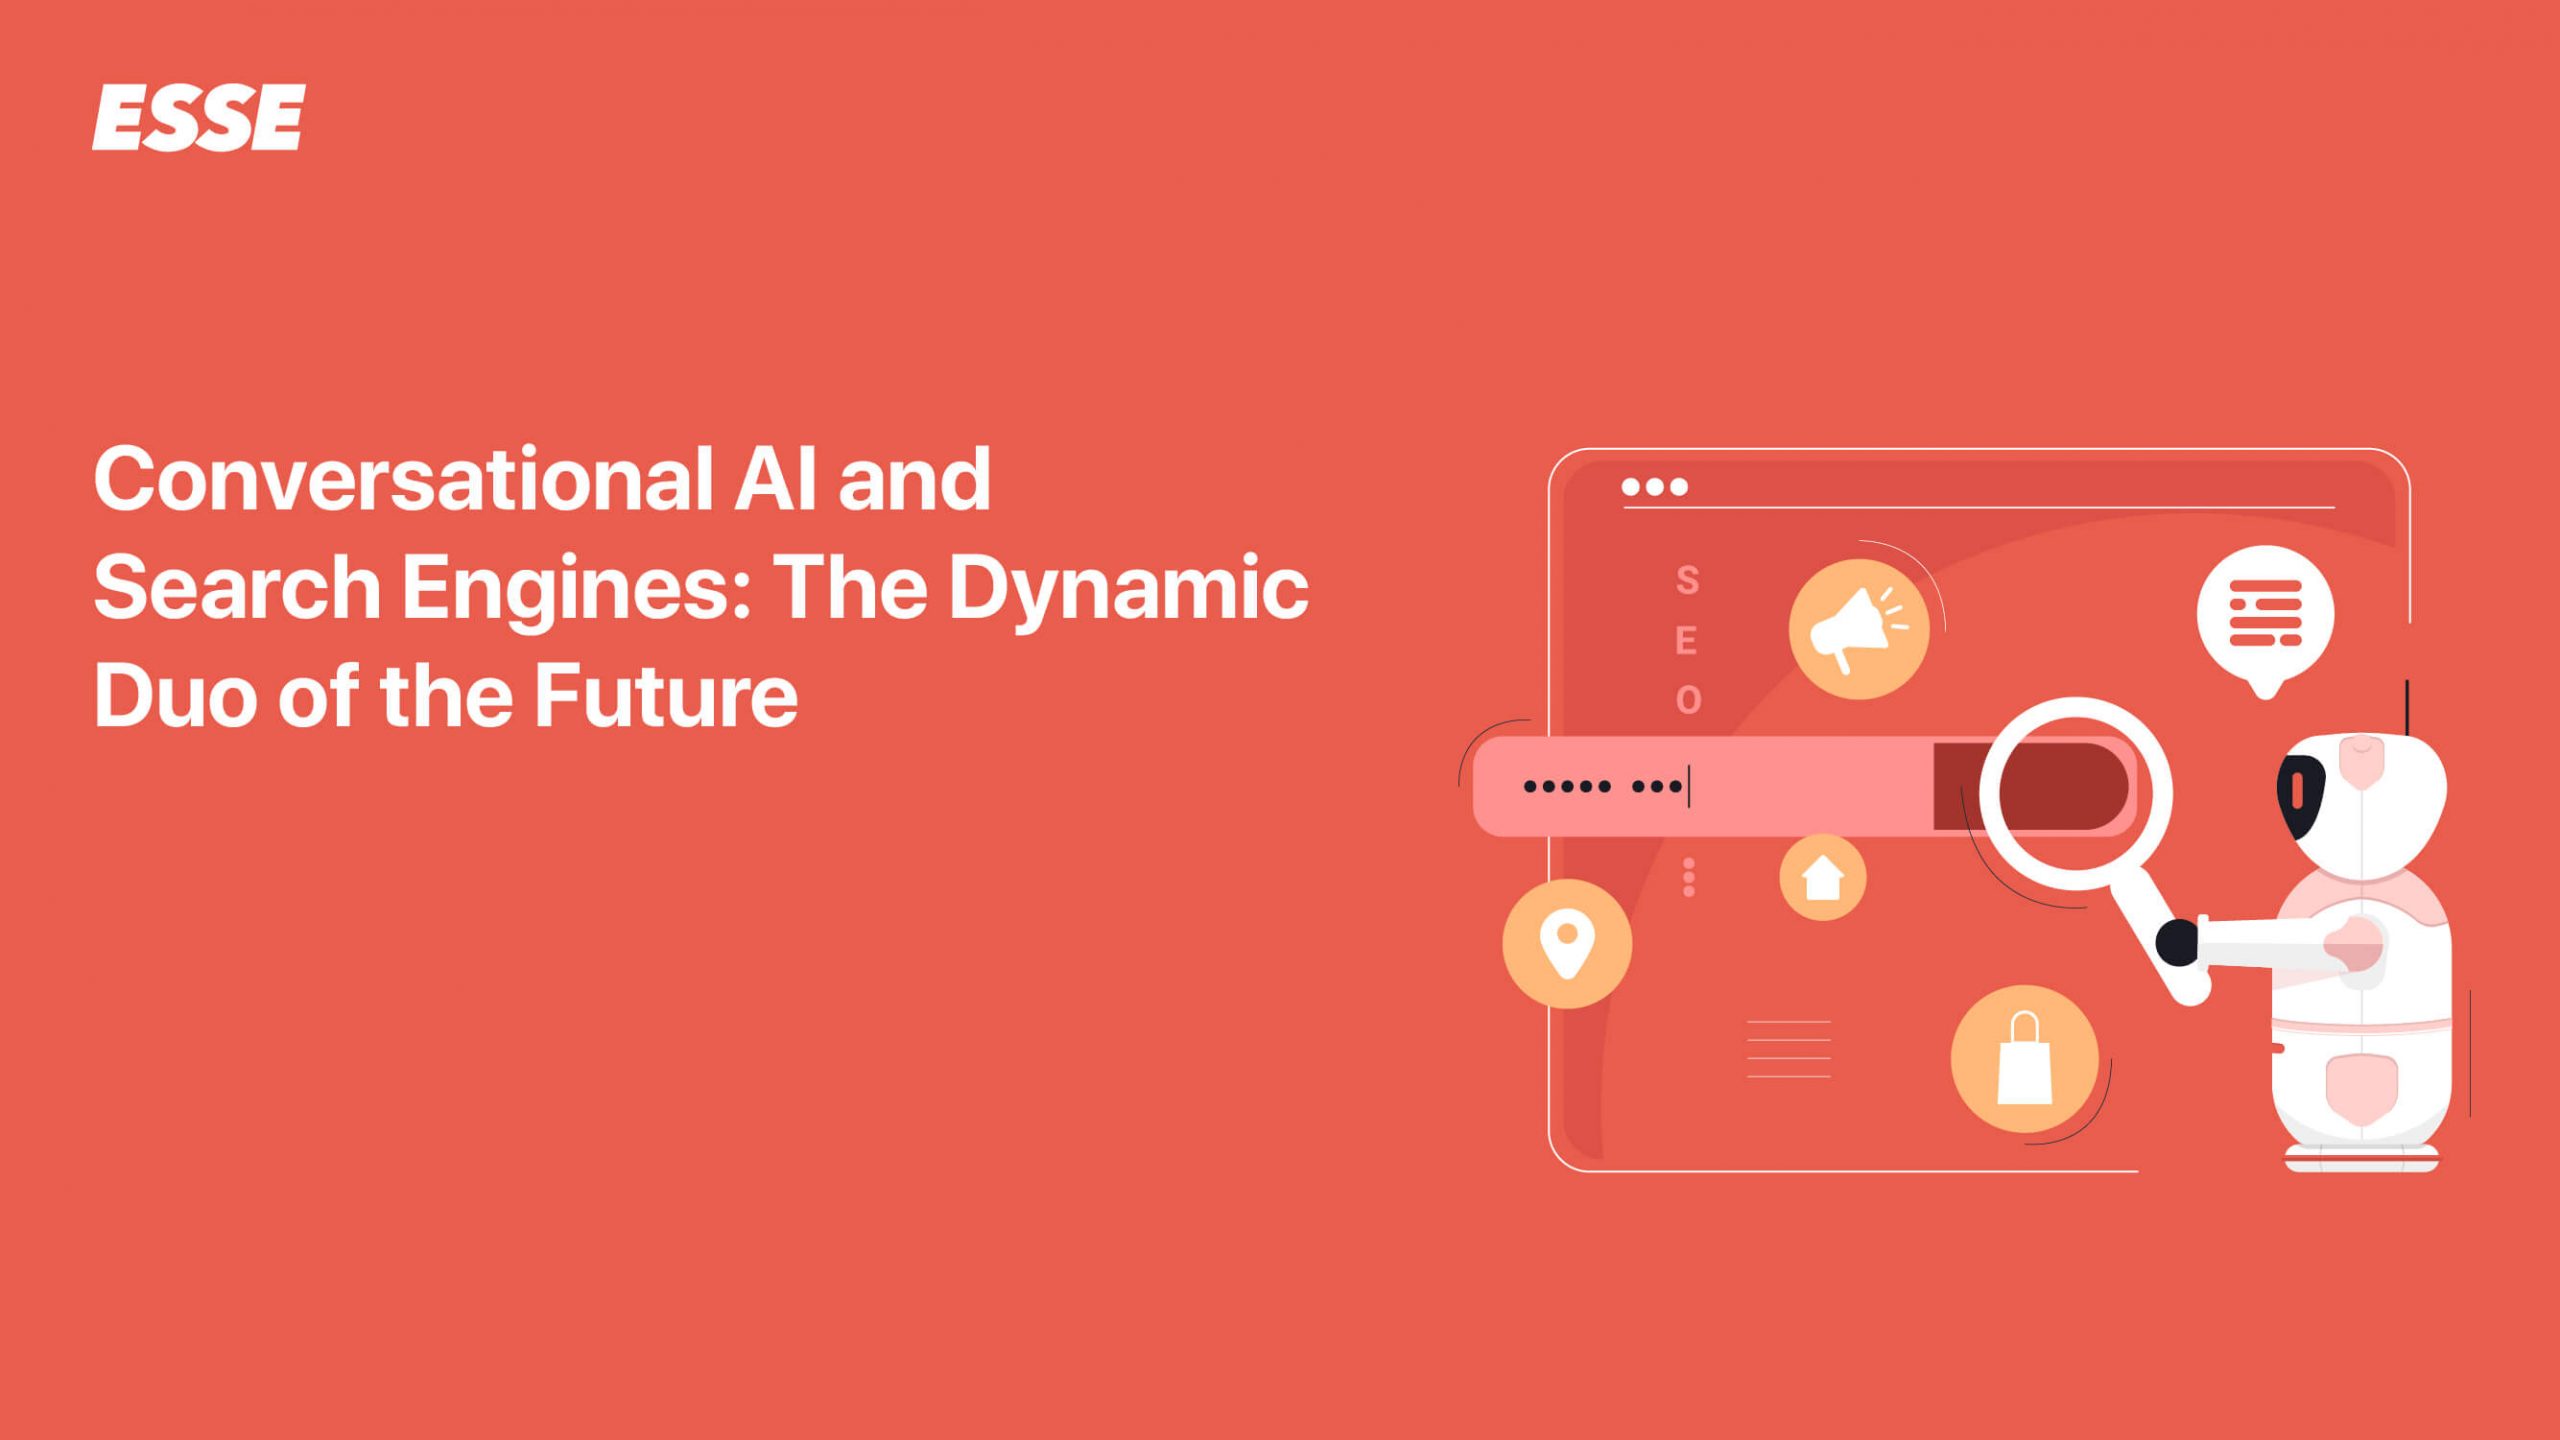 Conversational AI and Search Engines: The Dynamic Duo of the Future